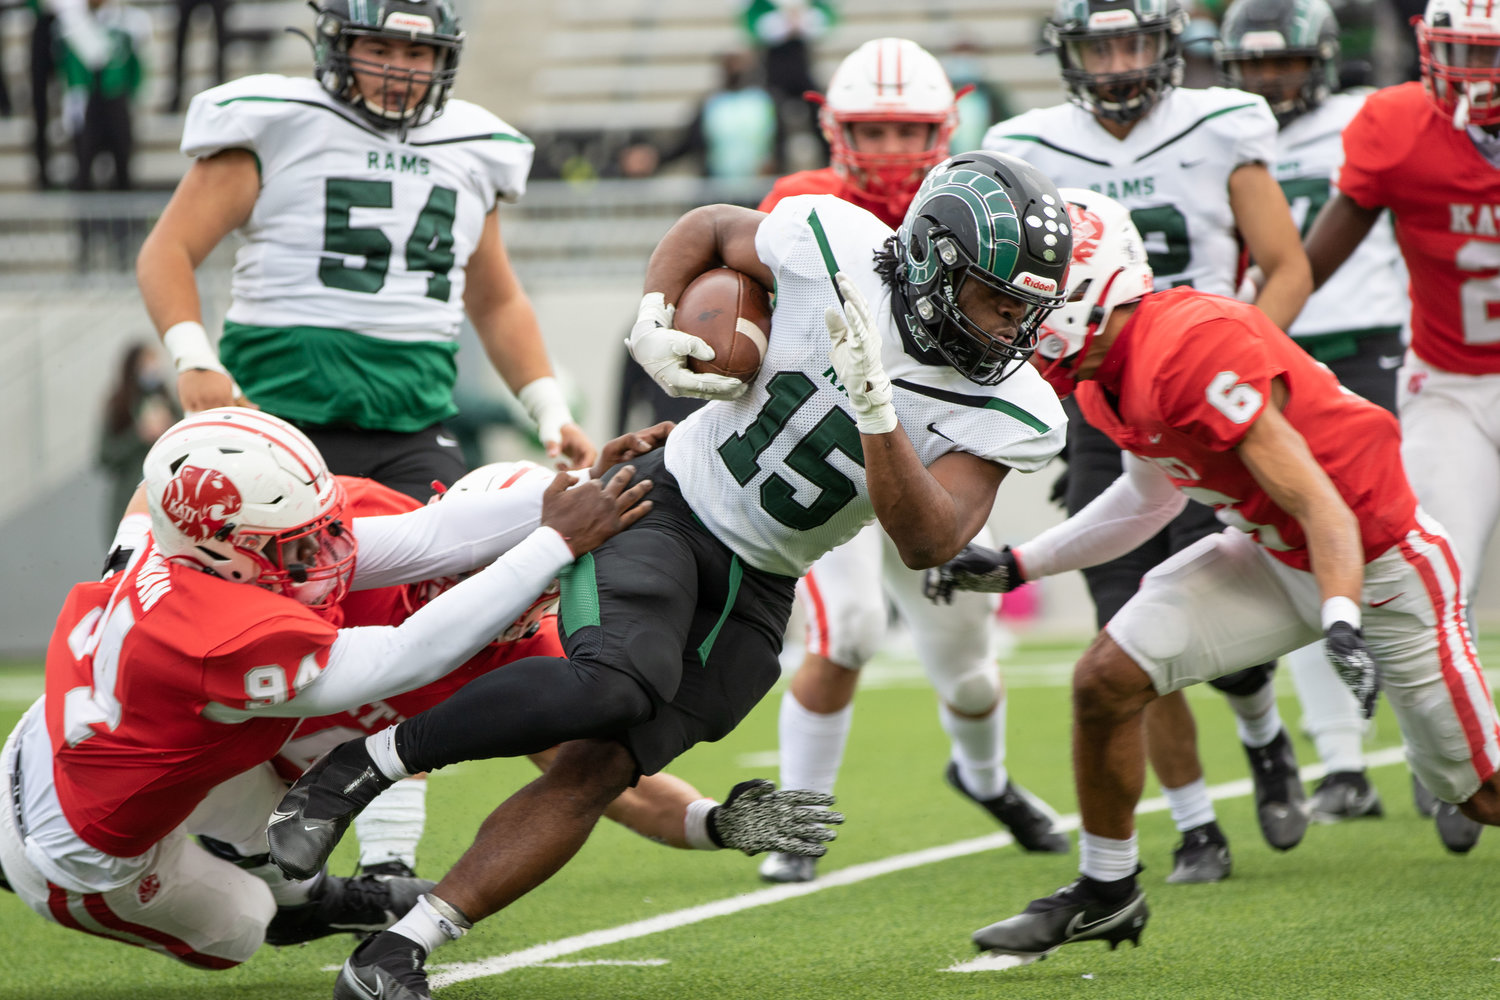 Mayde Creek senior running back Julius Loughridge (15) powers through defenders during a game against Katy earlier this season at Legacy Stadium. Loughridge was named District 19-6A’s Offensive Player of the Year.